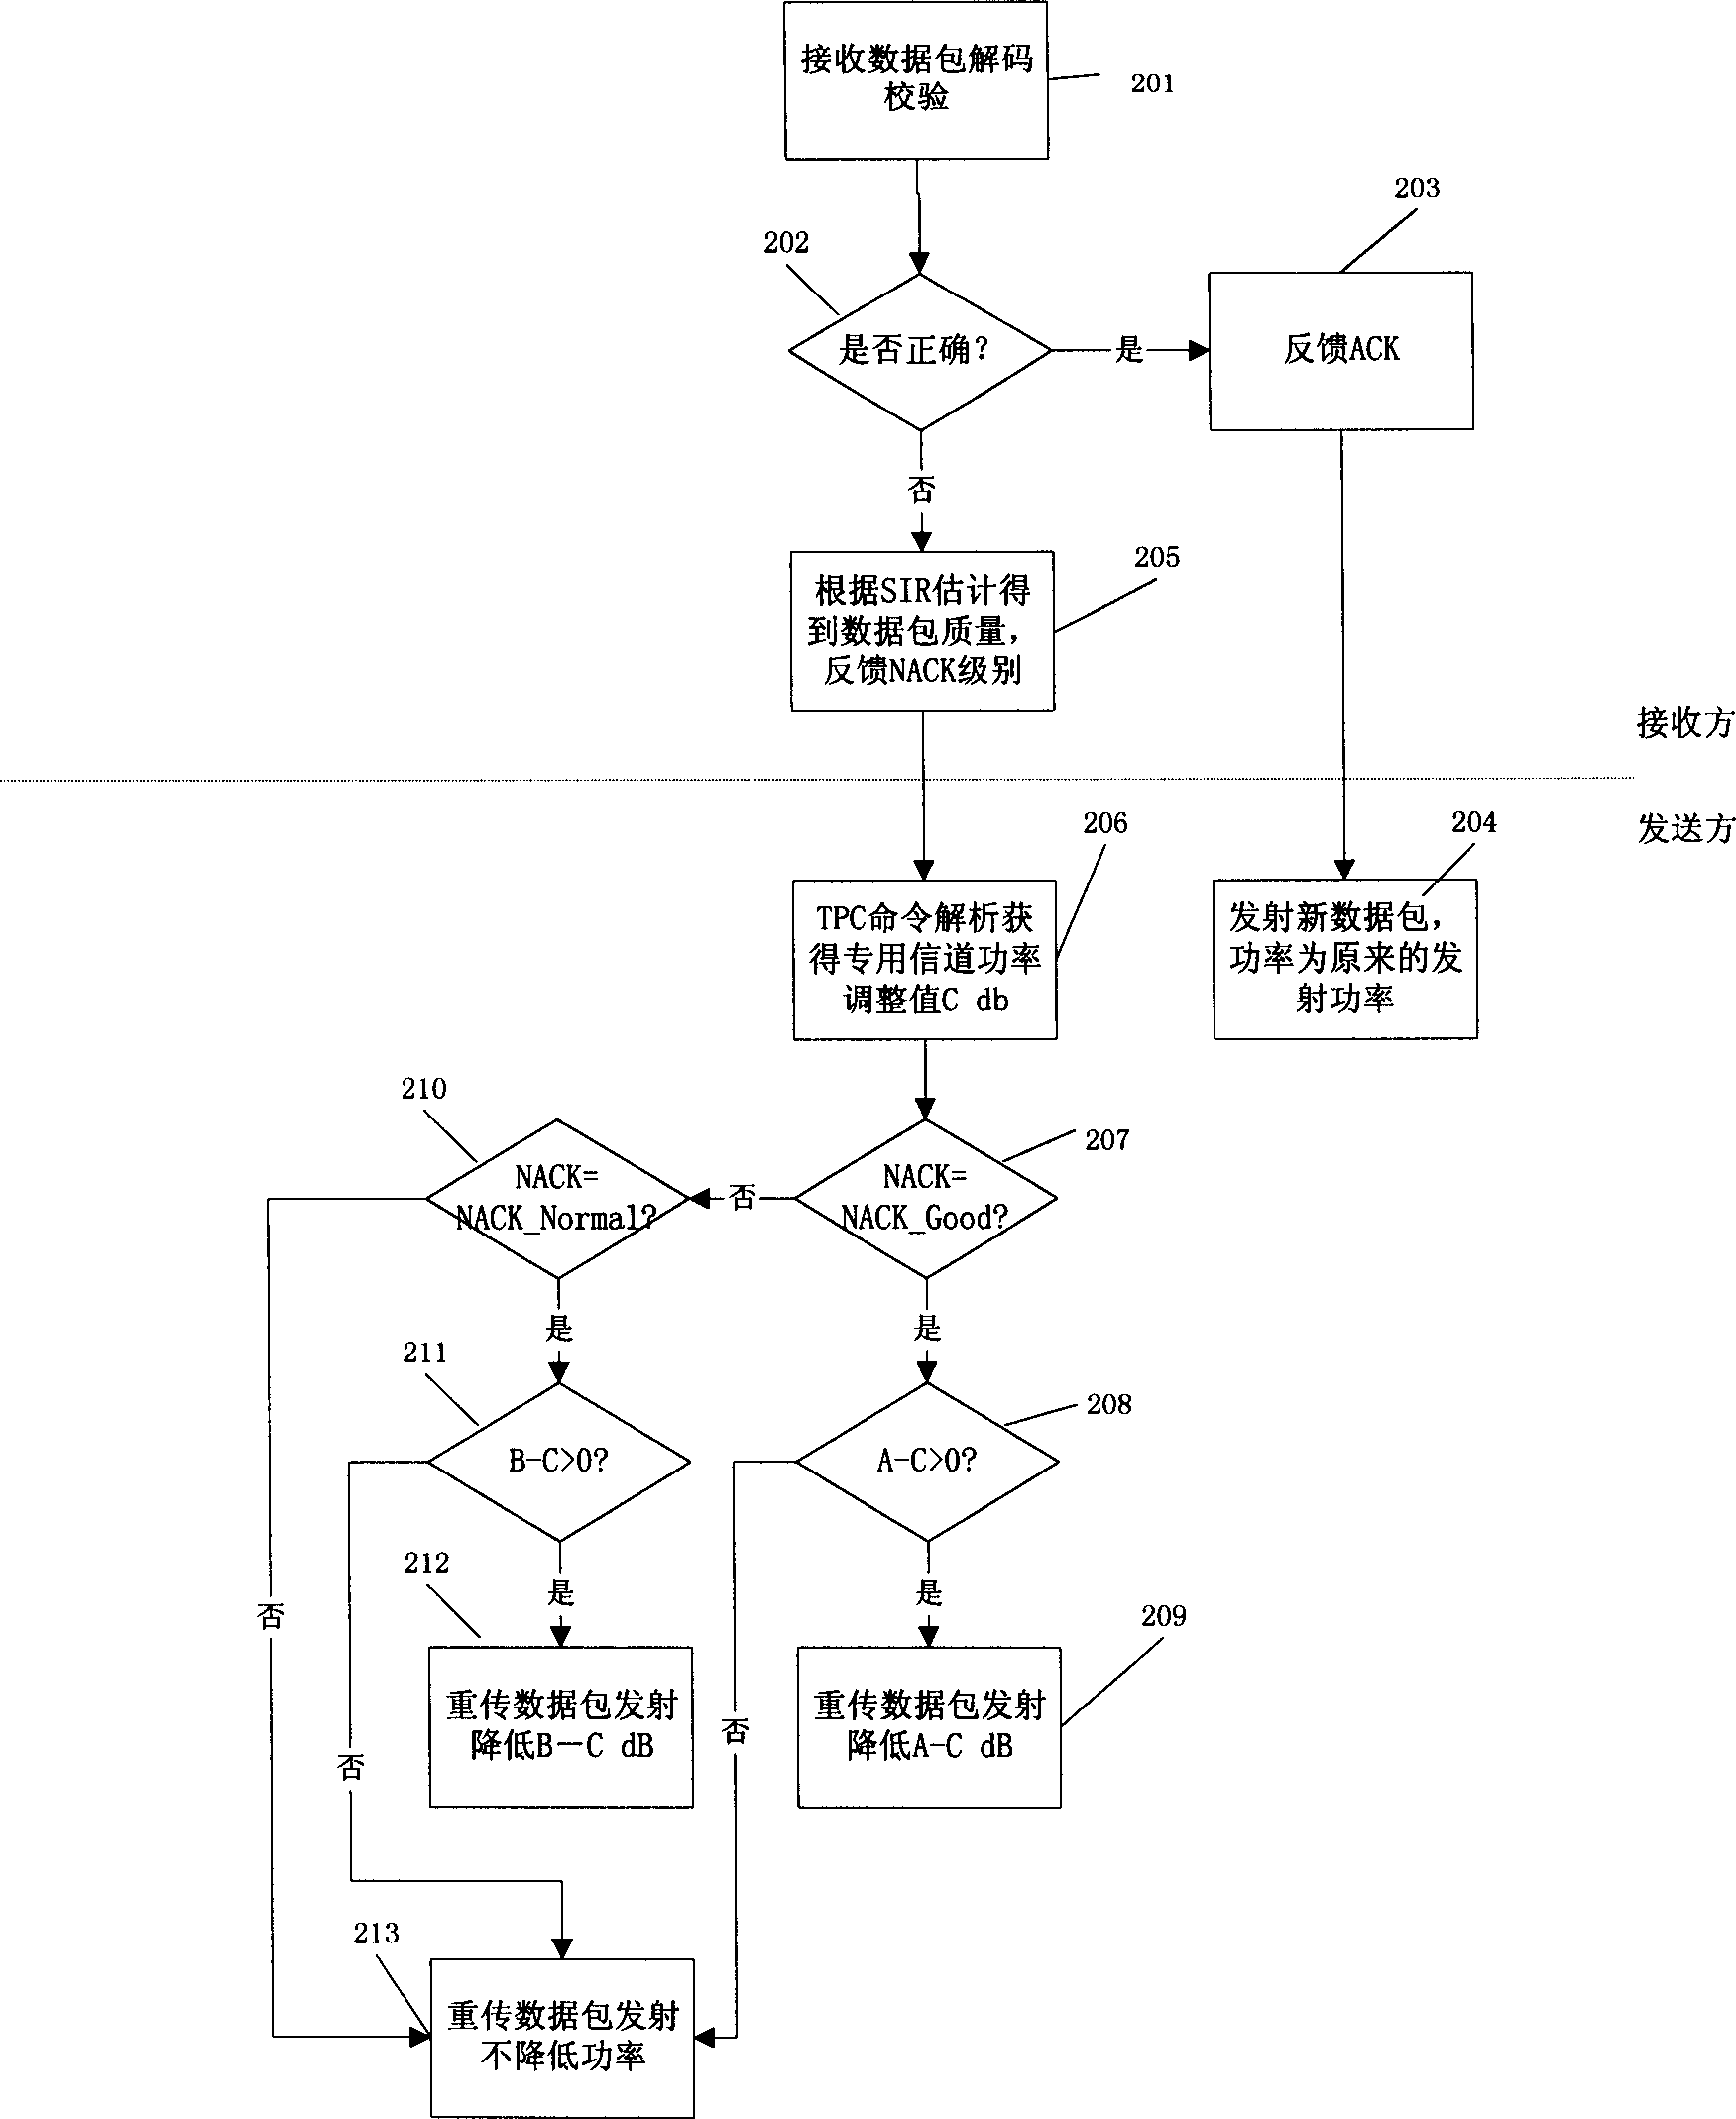 Power control method based on mixed automatic retransmission mechanism